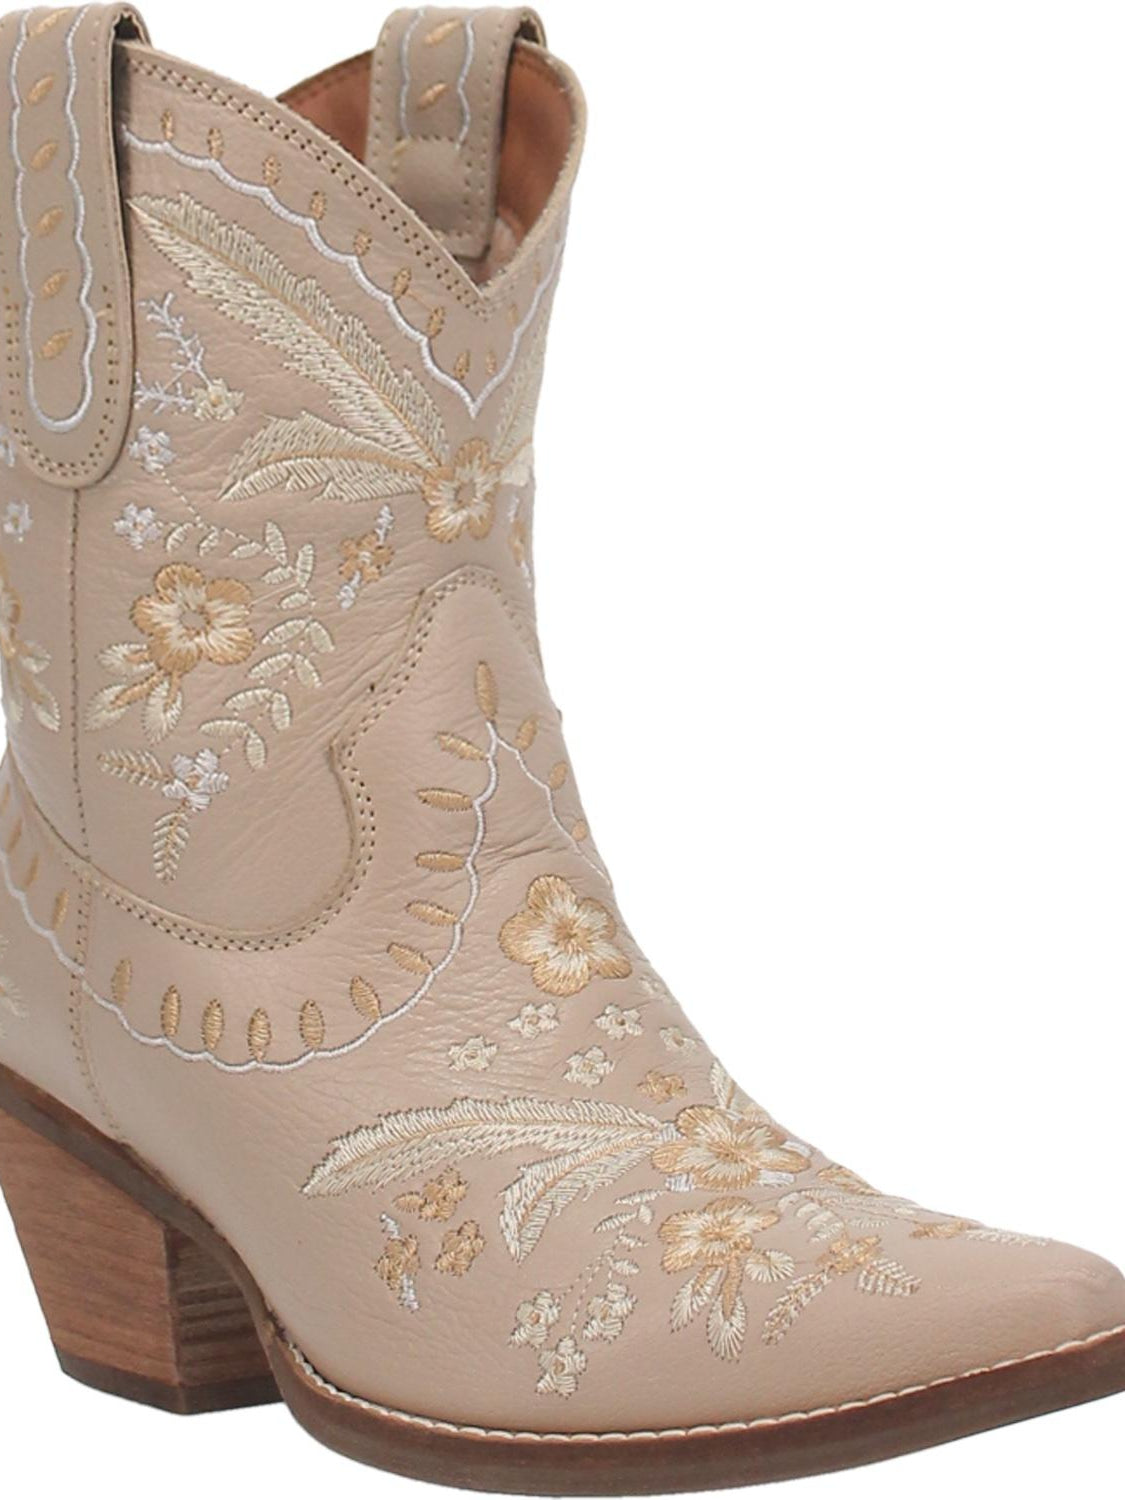 Prim Rose Bootie by Dingo from Dan Post - Sand